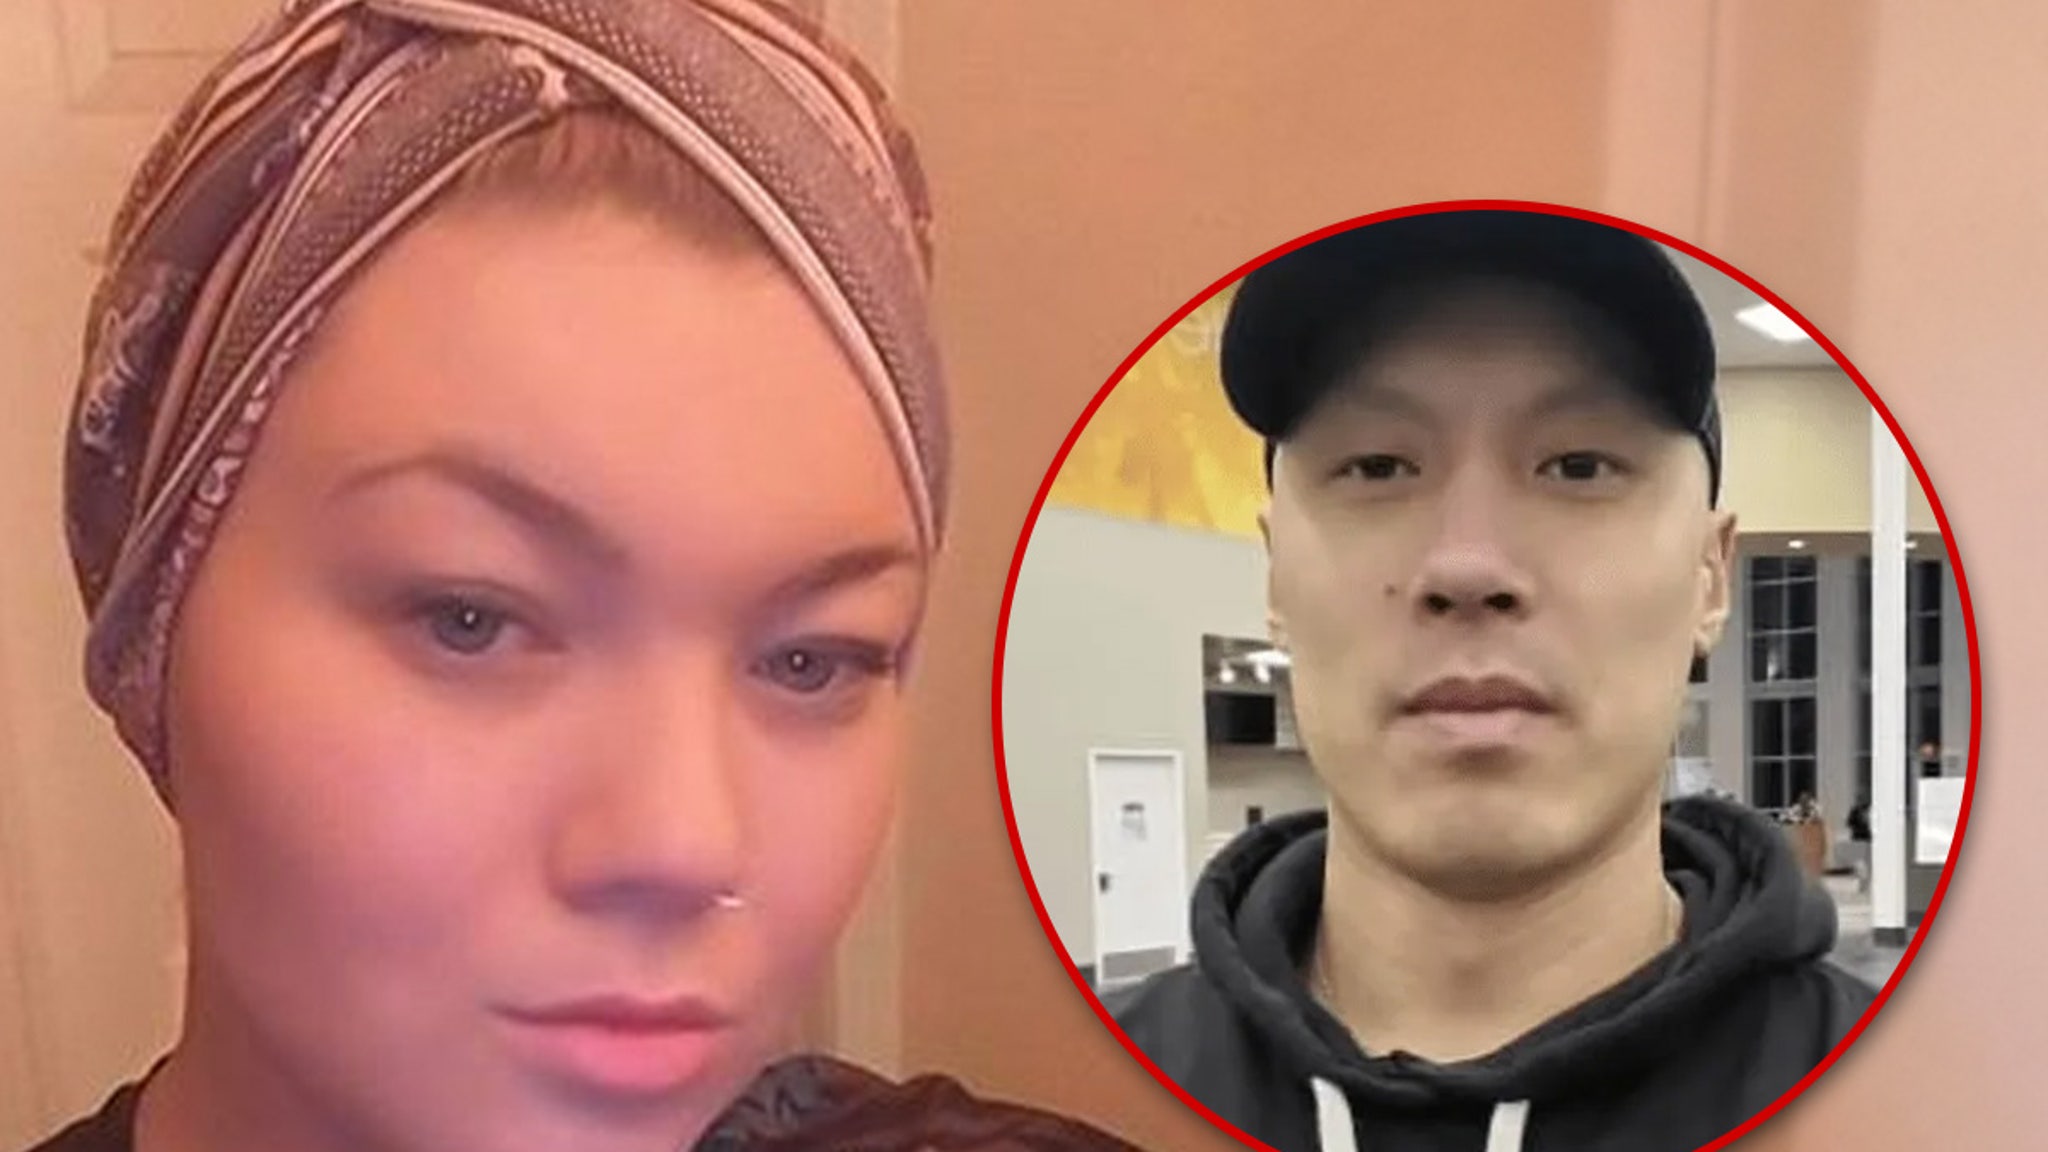 'Teen Mom' Amber Portwood's Missing Fiancé Called Police, Confirms He's OK